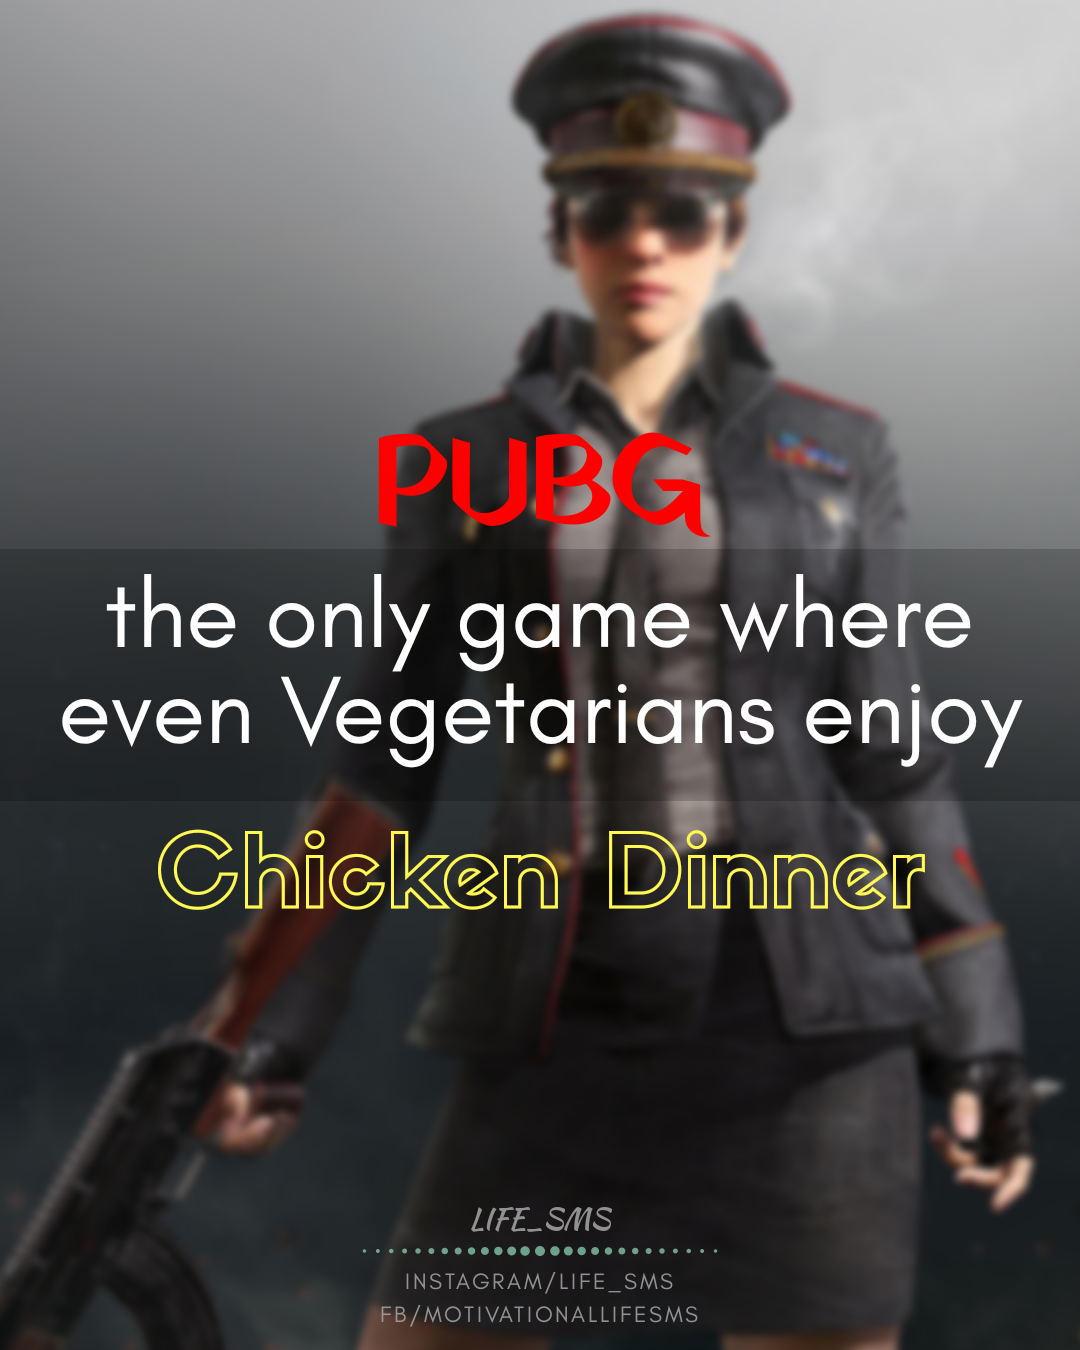 PUBG is the only Game - Pubg Quotes Latest